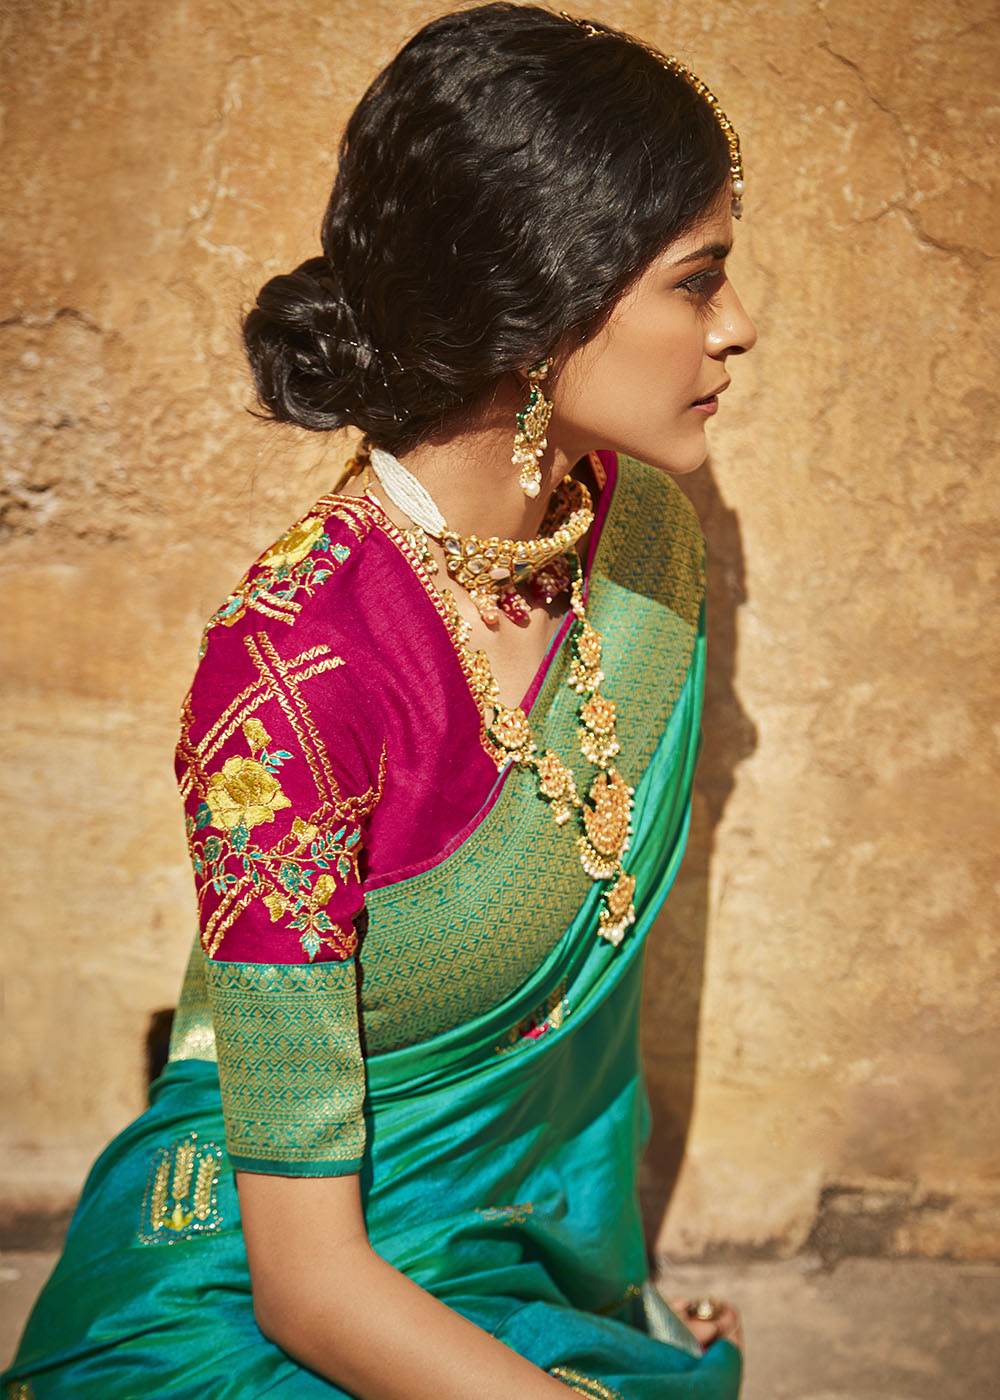 Exquisite Peacock Green Woven Silk Saree with Embroidered Blouse